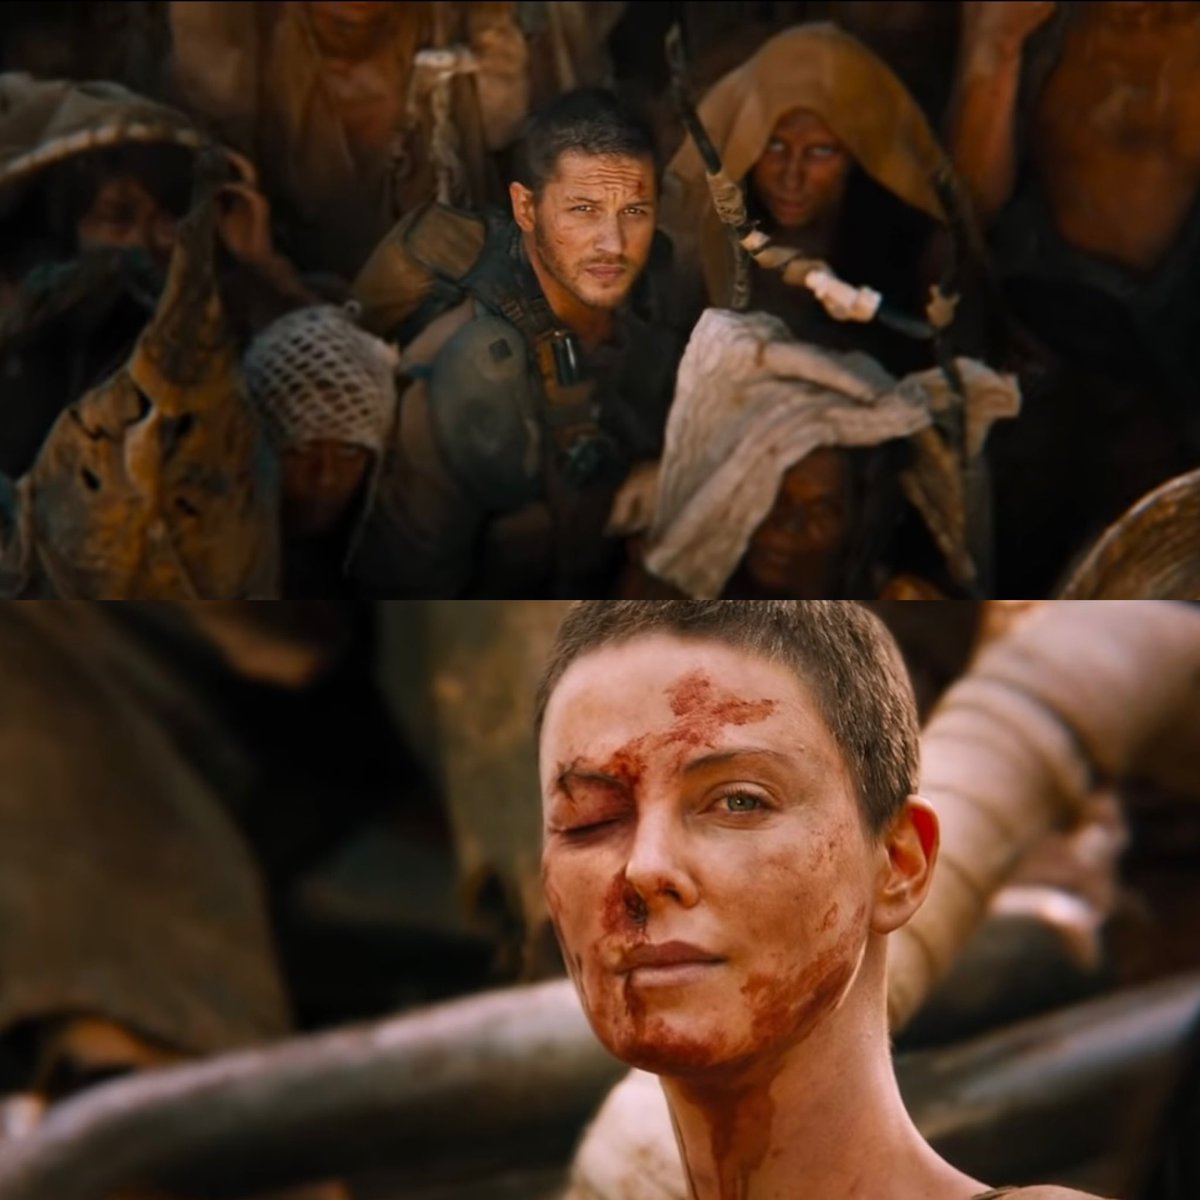 If we never get another Mad Max film, this was the perfect way to end the franchise.